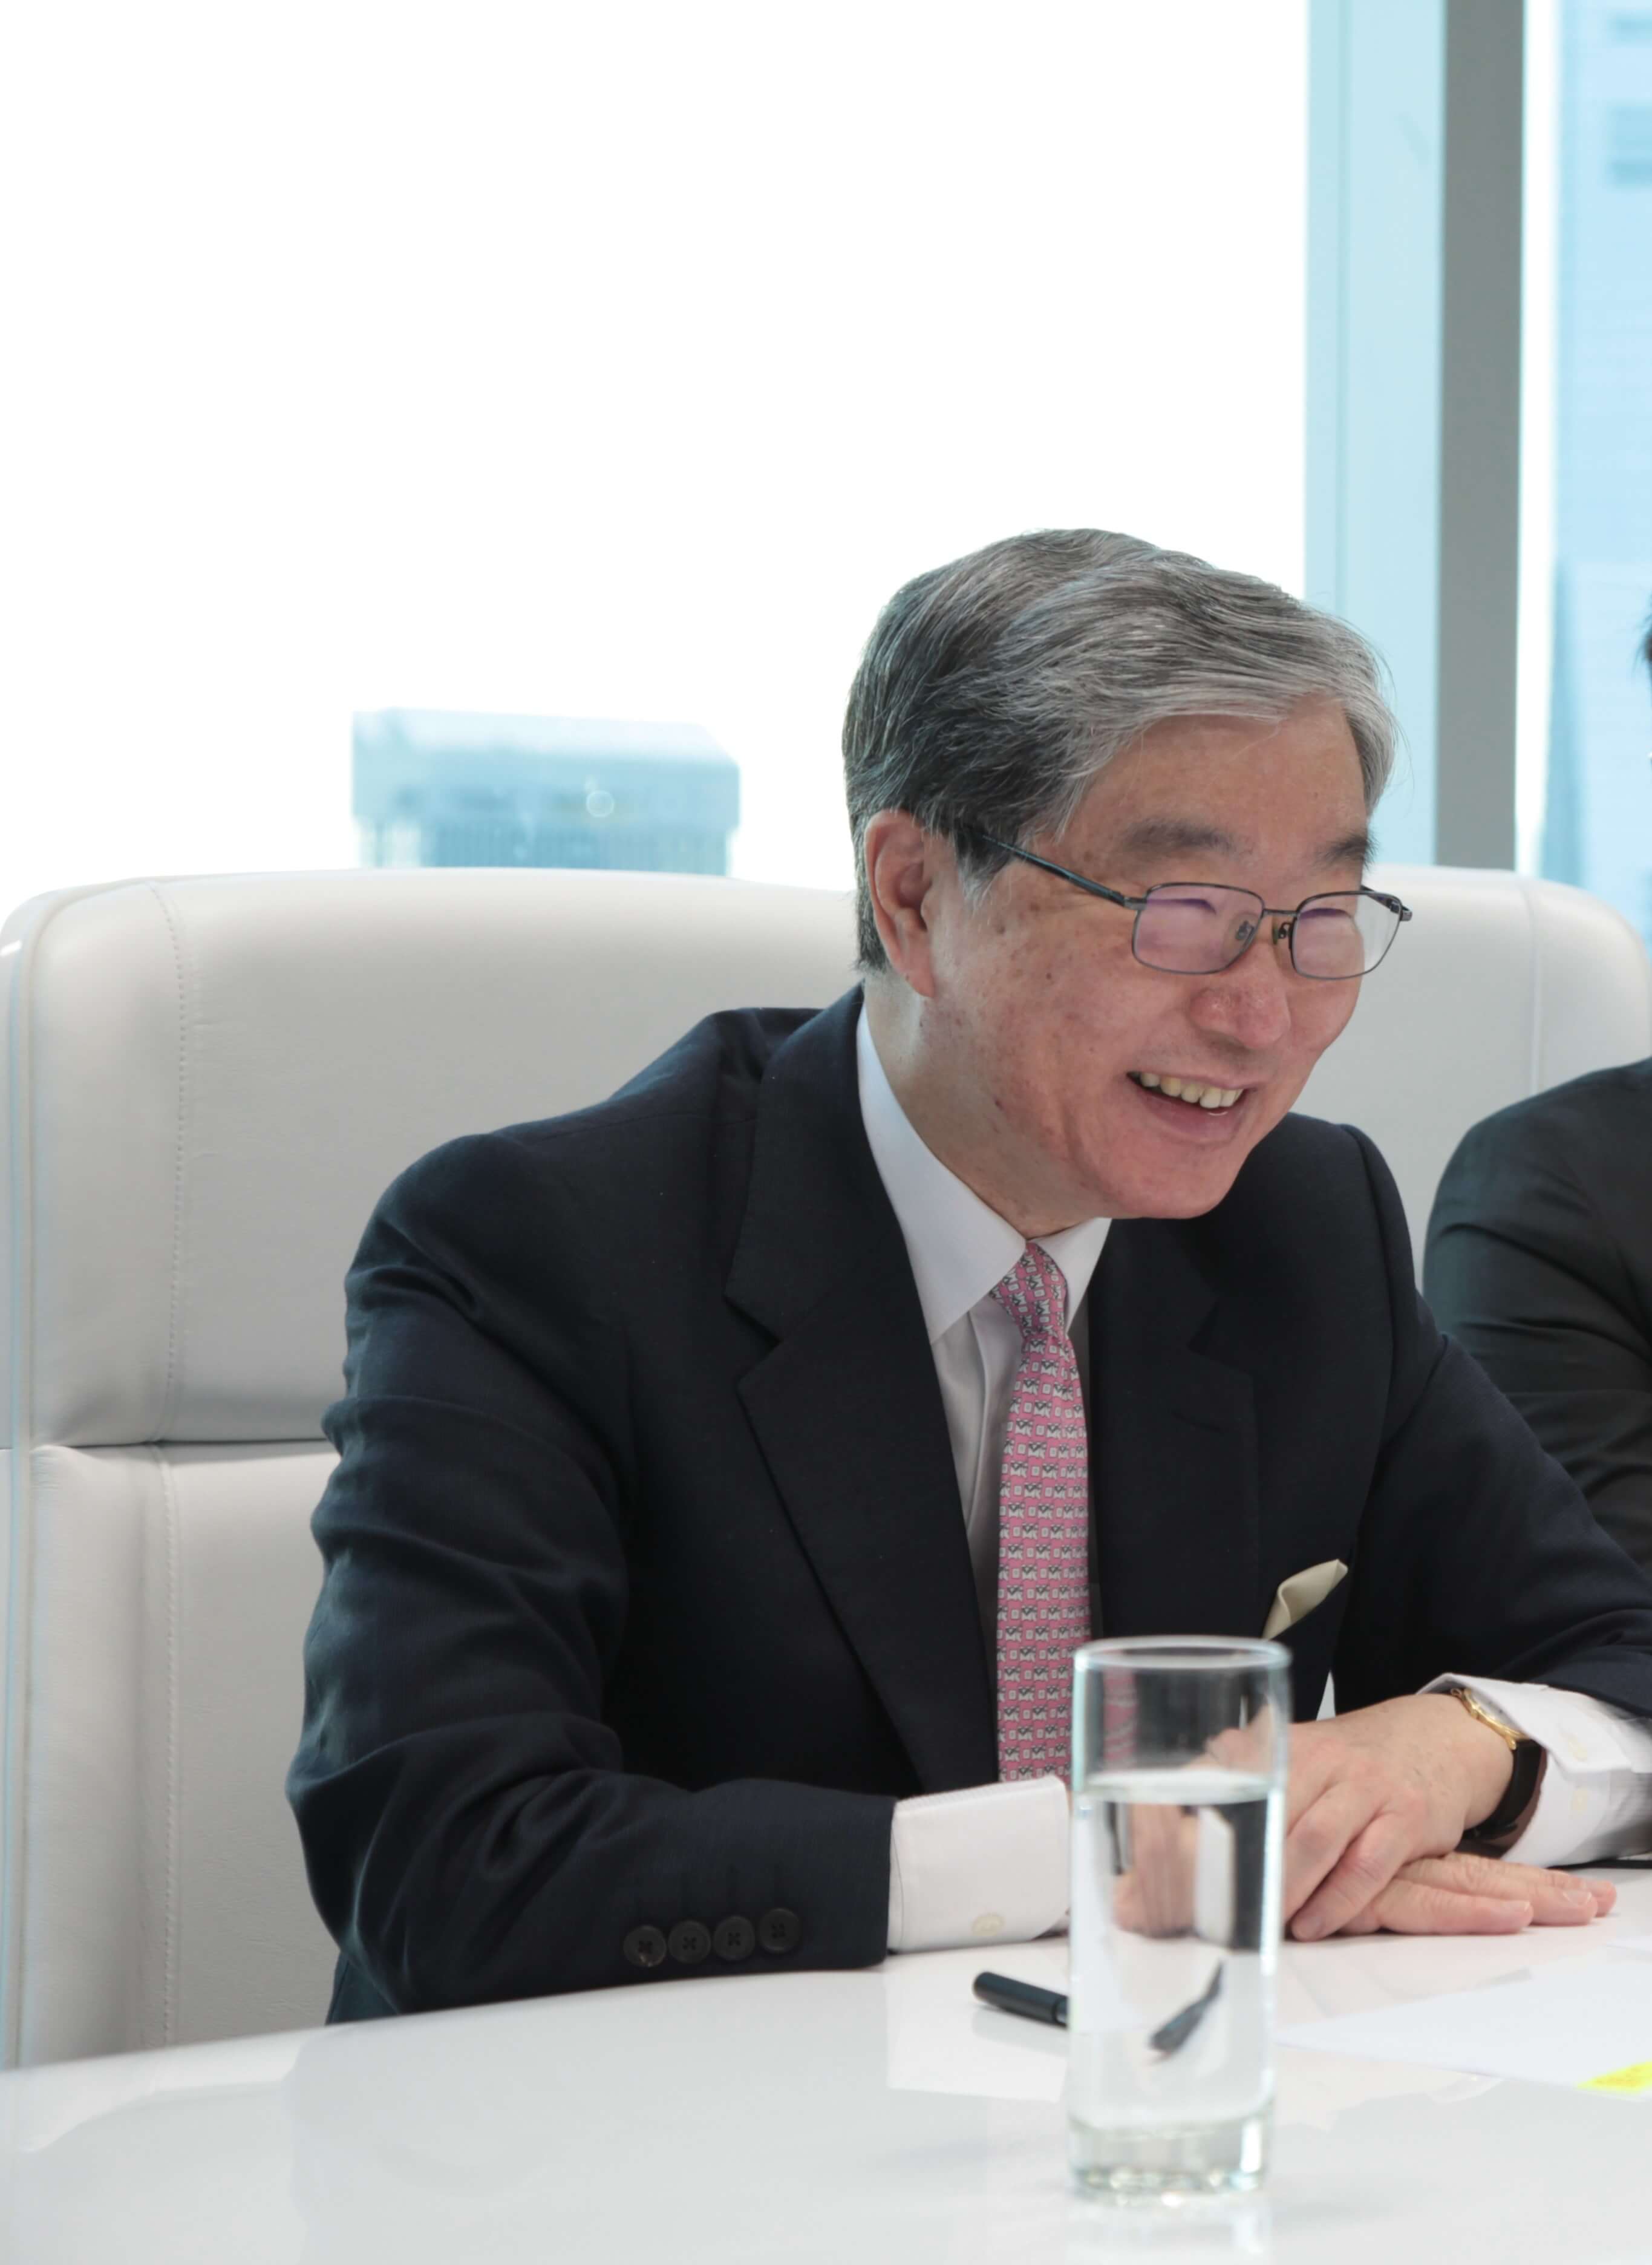 Founder and Chairman of Bank of Asia Mr. Carson Wen Signed the Agreement and Become a Member of Belt and Road Service Connections.